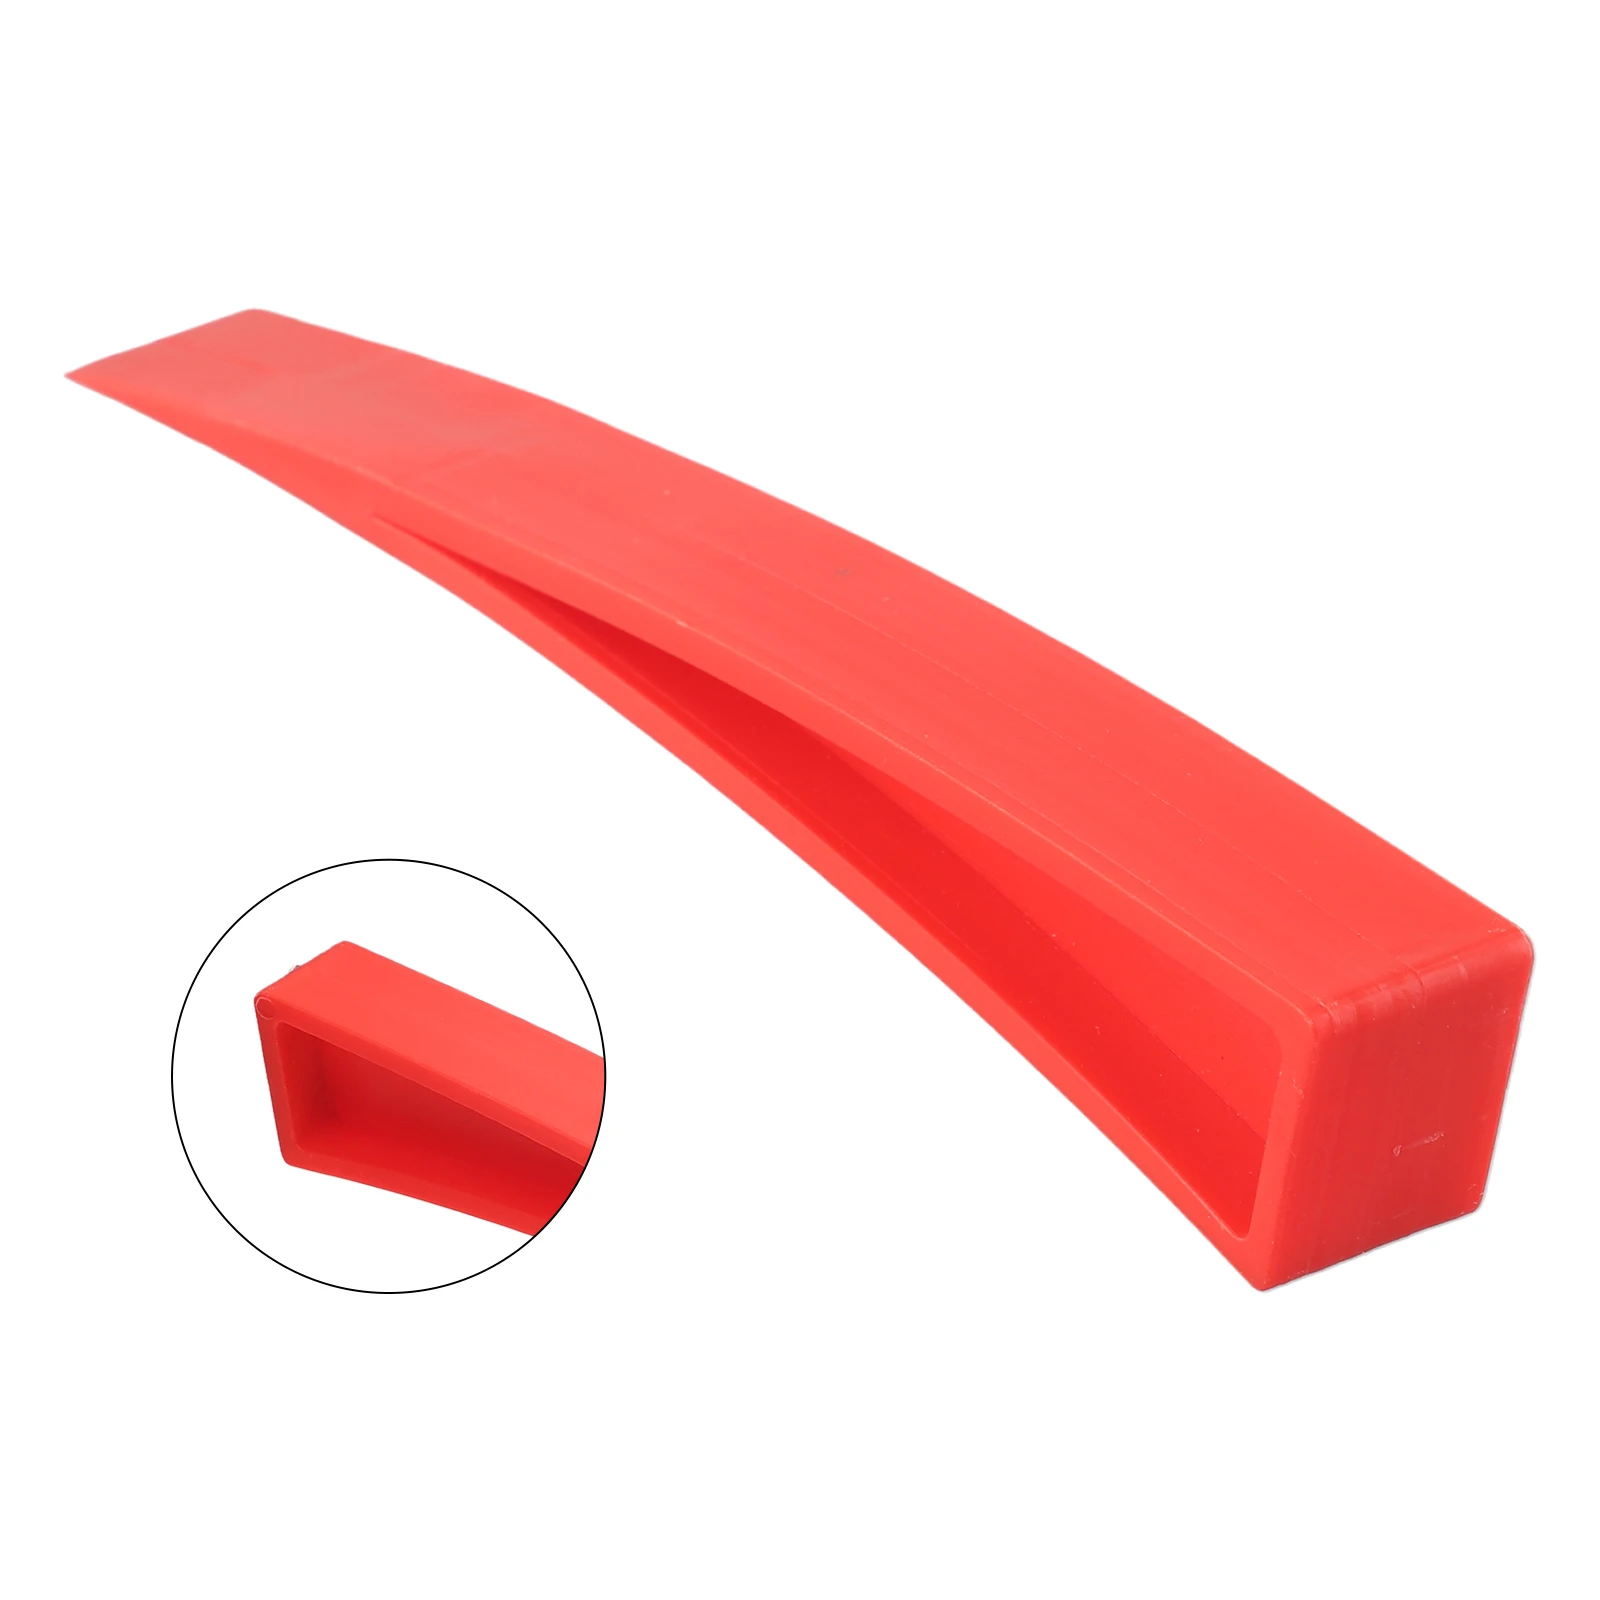 Red Auto/Car Door For Window Wedge Panel Paintless Dent Removal Repair Hand Tool Plastic-Accessories For Vehicles car panel trim removal tool plastic seesaw kit for toyota trd prado rav4 yaris hilux prius avensis chr sienna car accessories